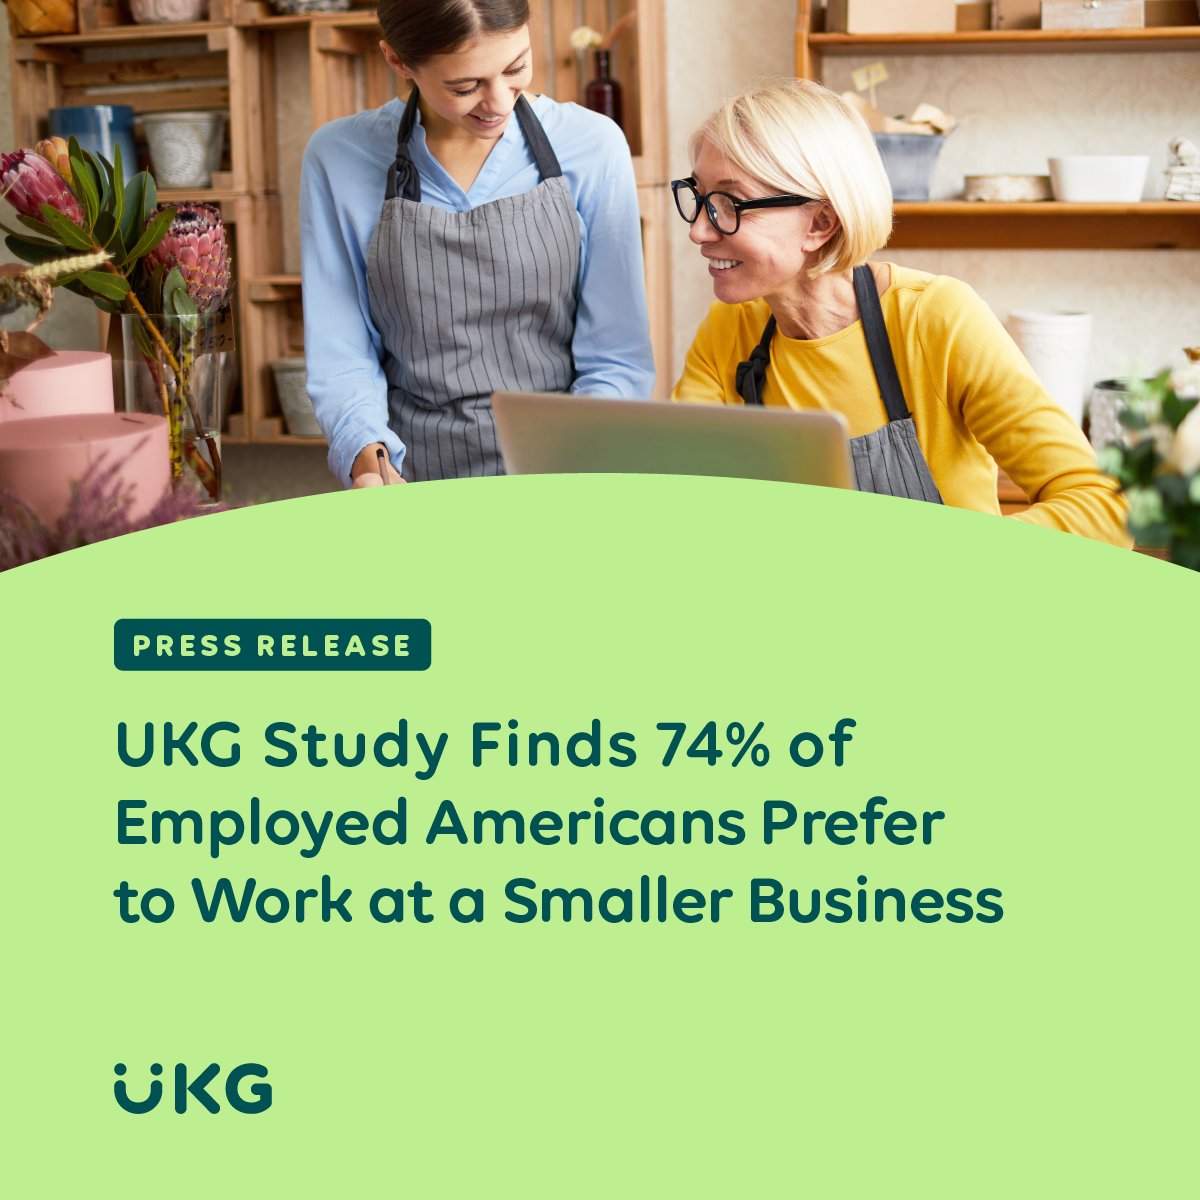 67% percent of employed Americans believe it is harder for smaller businesses to hire talent, which may be explained by the fact that nearly 4 out of 5 U.S. workers (78%) say larger businesses can offer higher wages. Read the full release: ukg.inc/3QlVnjF. #WeAreUKG